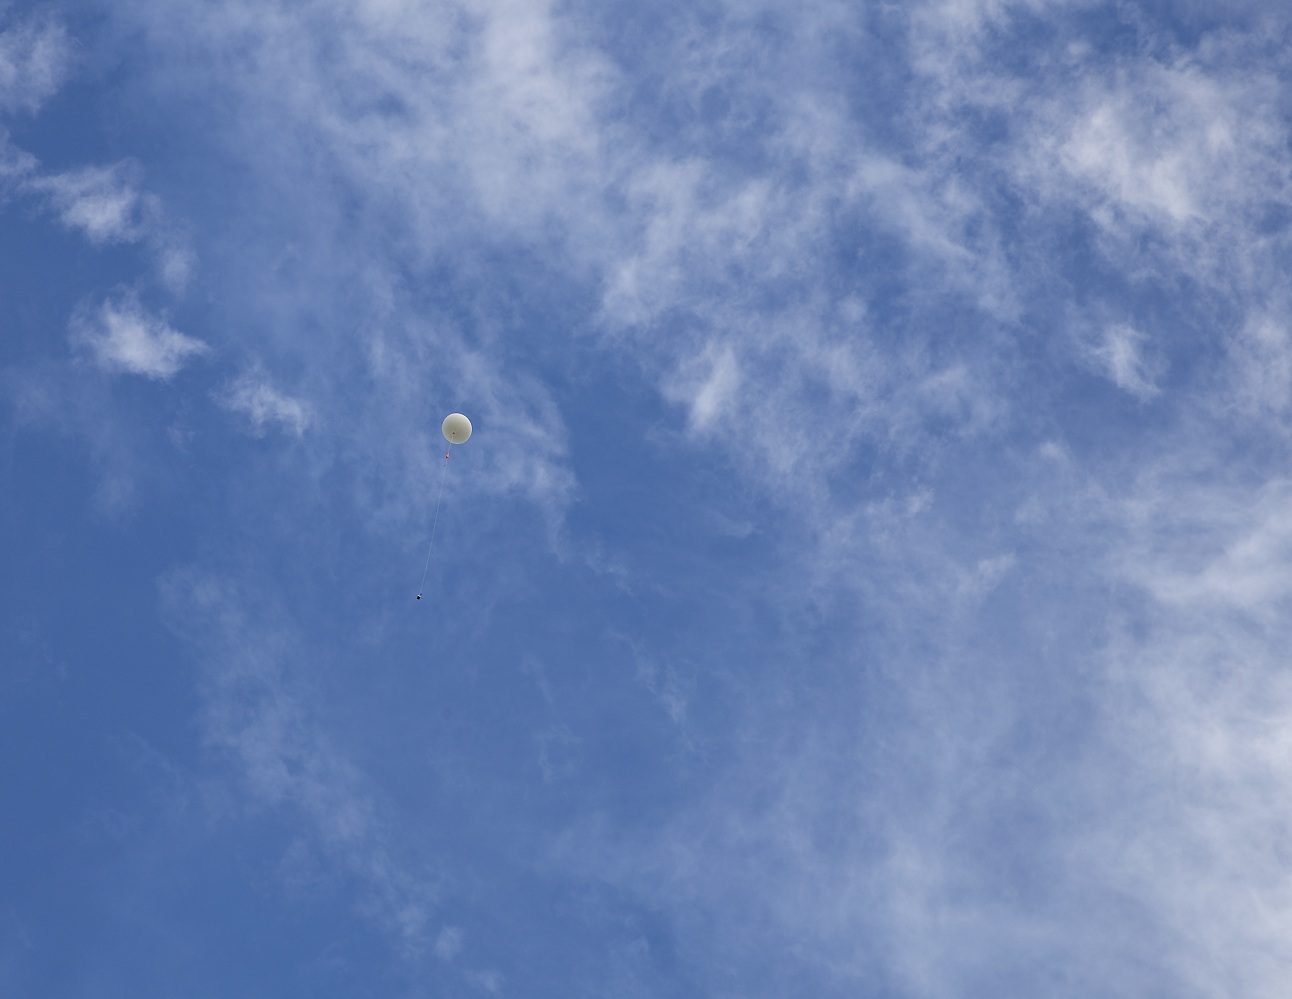 Weather balloon ascending